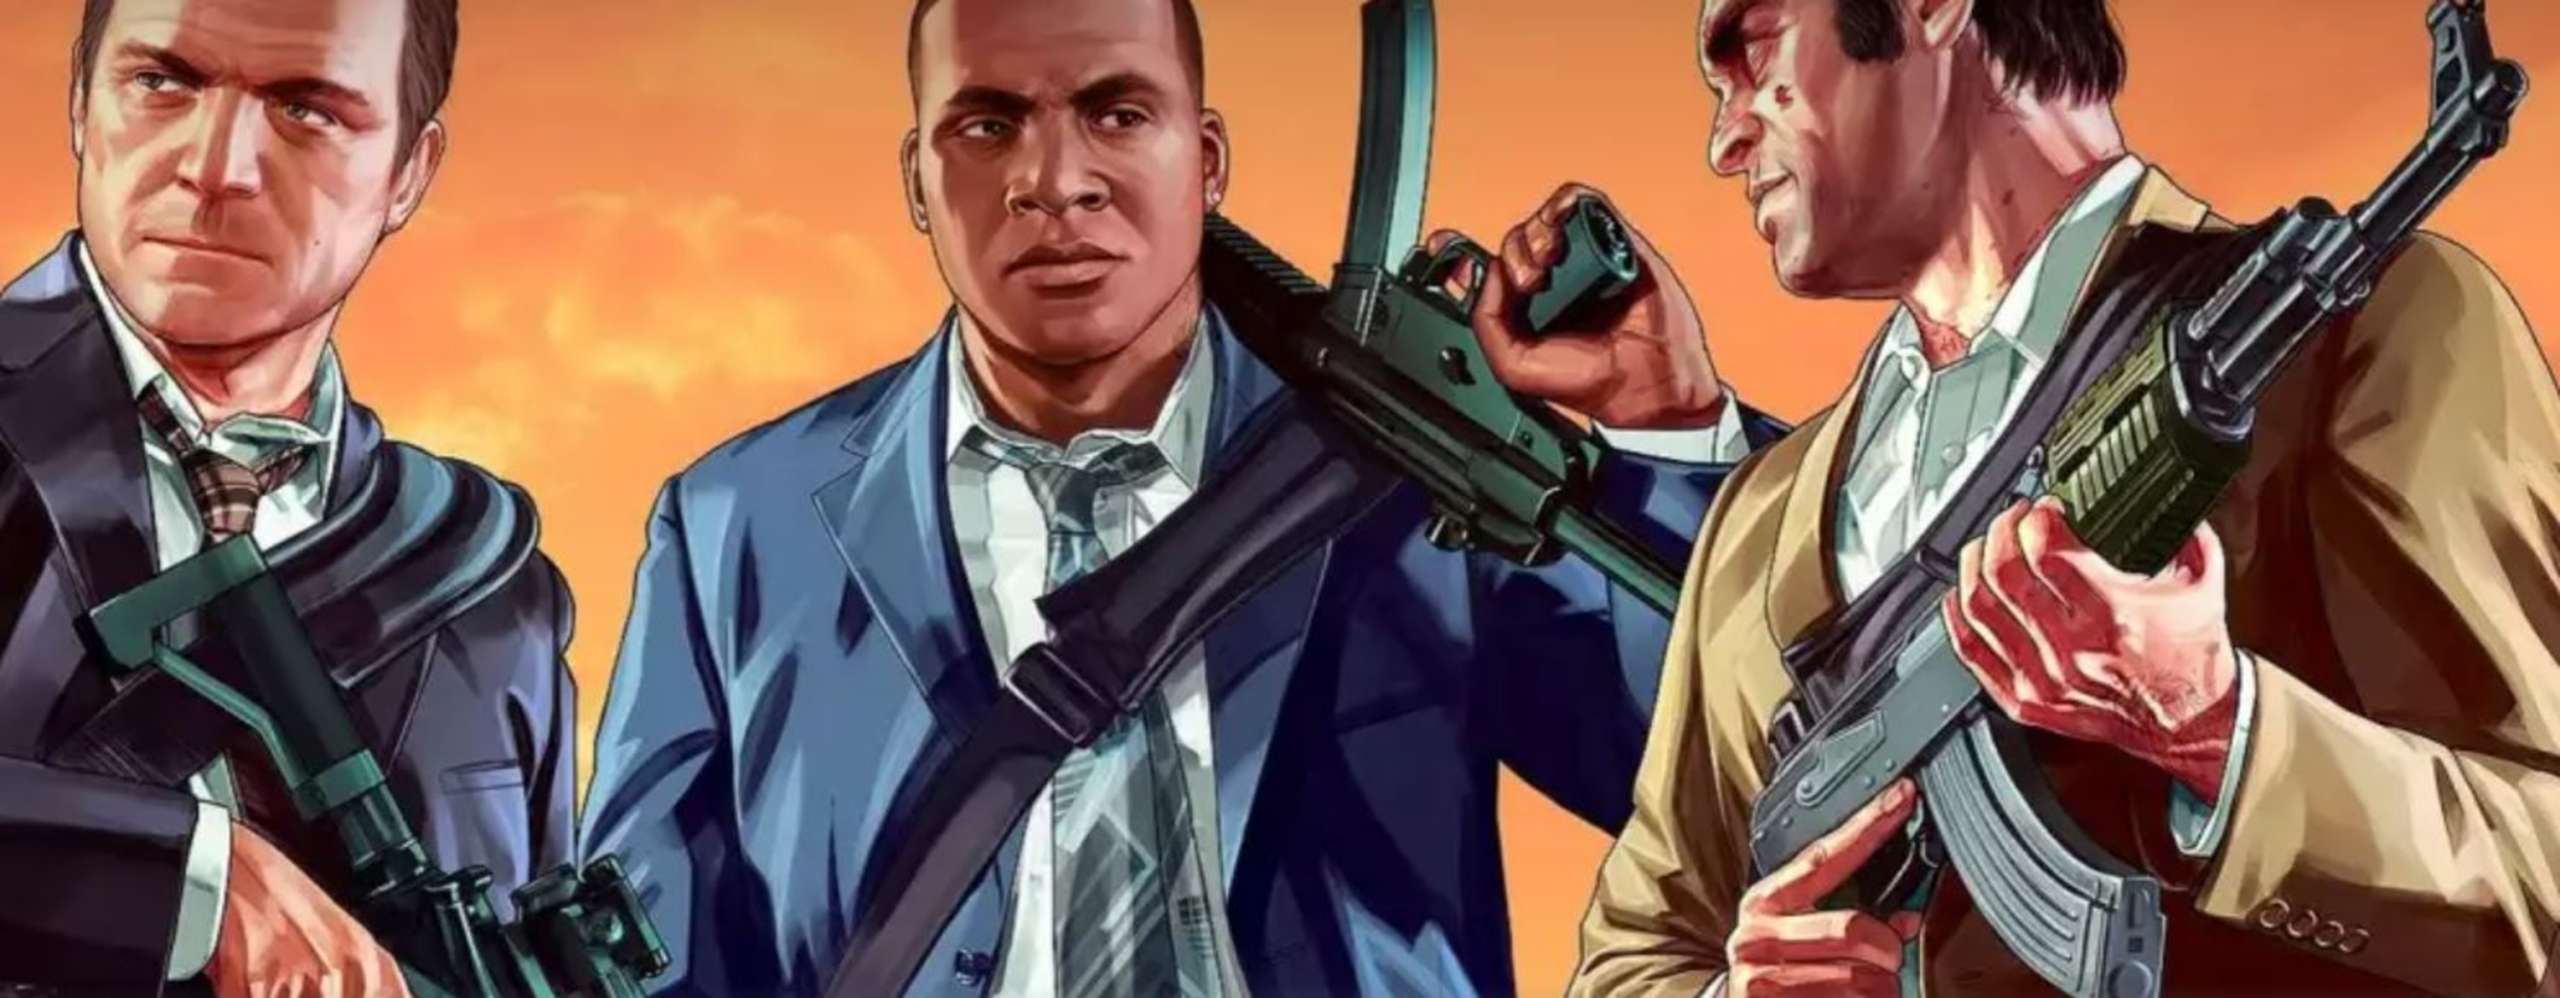 Grand Theft Auto 5, Which Has Played A Significant Role In The Gaming Industry For Almost Ten Years, Seems To Be Being Replaced By The Corporation